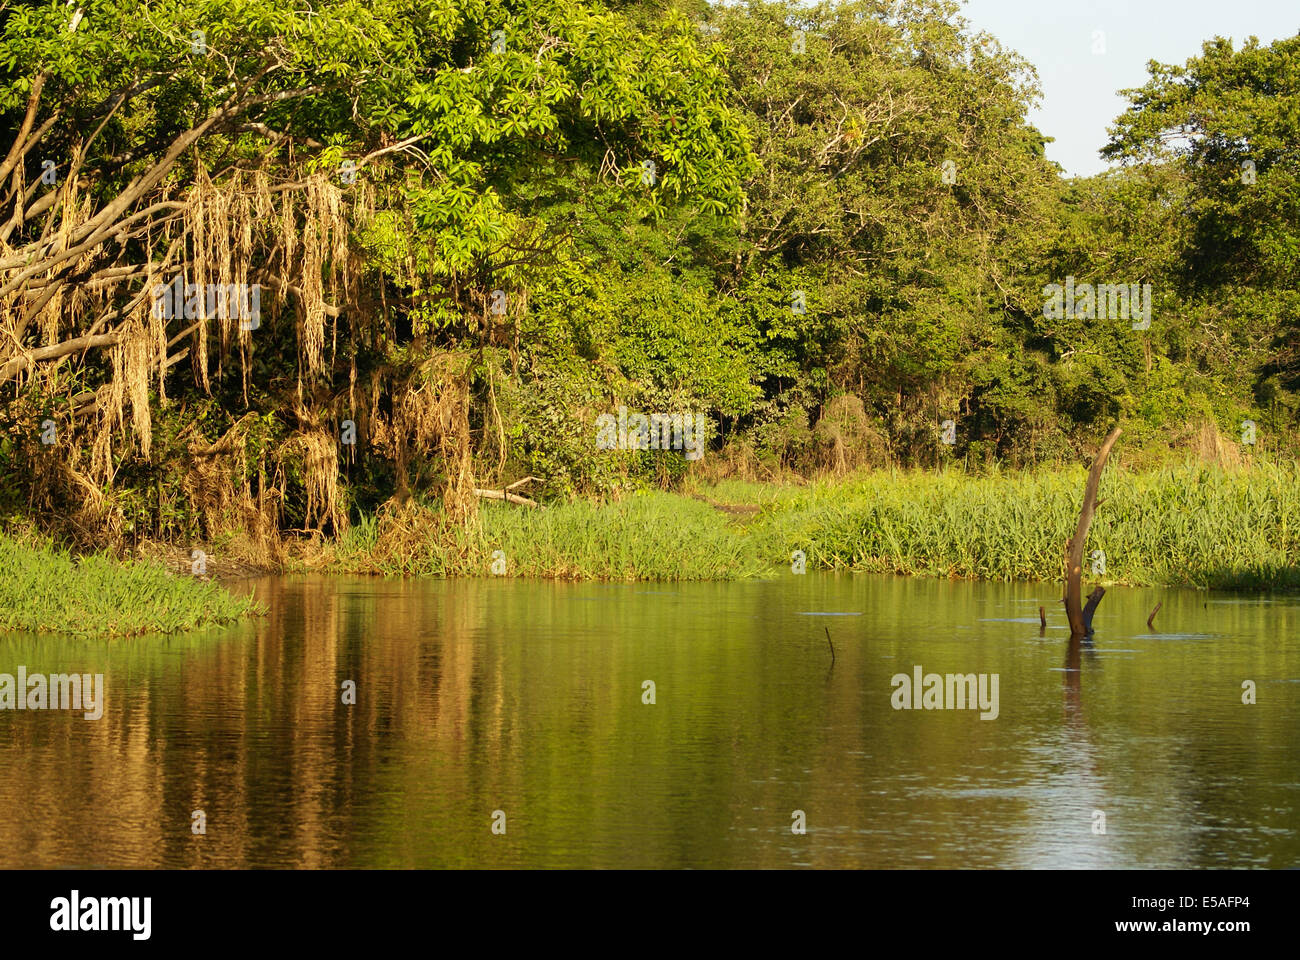 A river and beautiful trees in a rainforest Peru Stock Photo